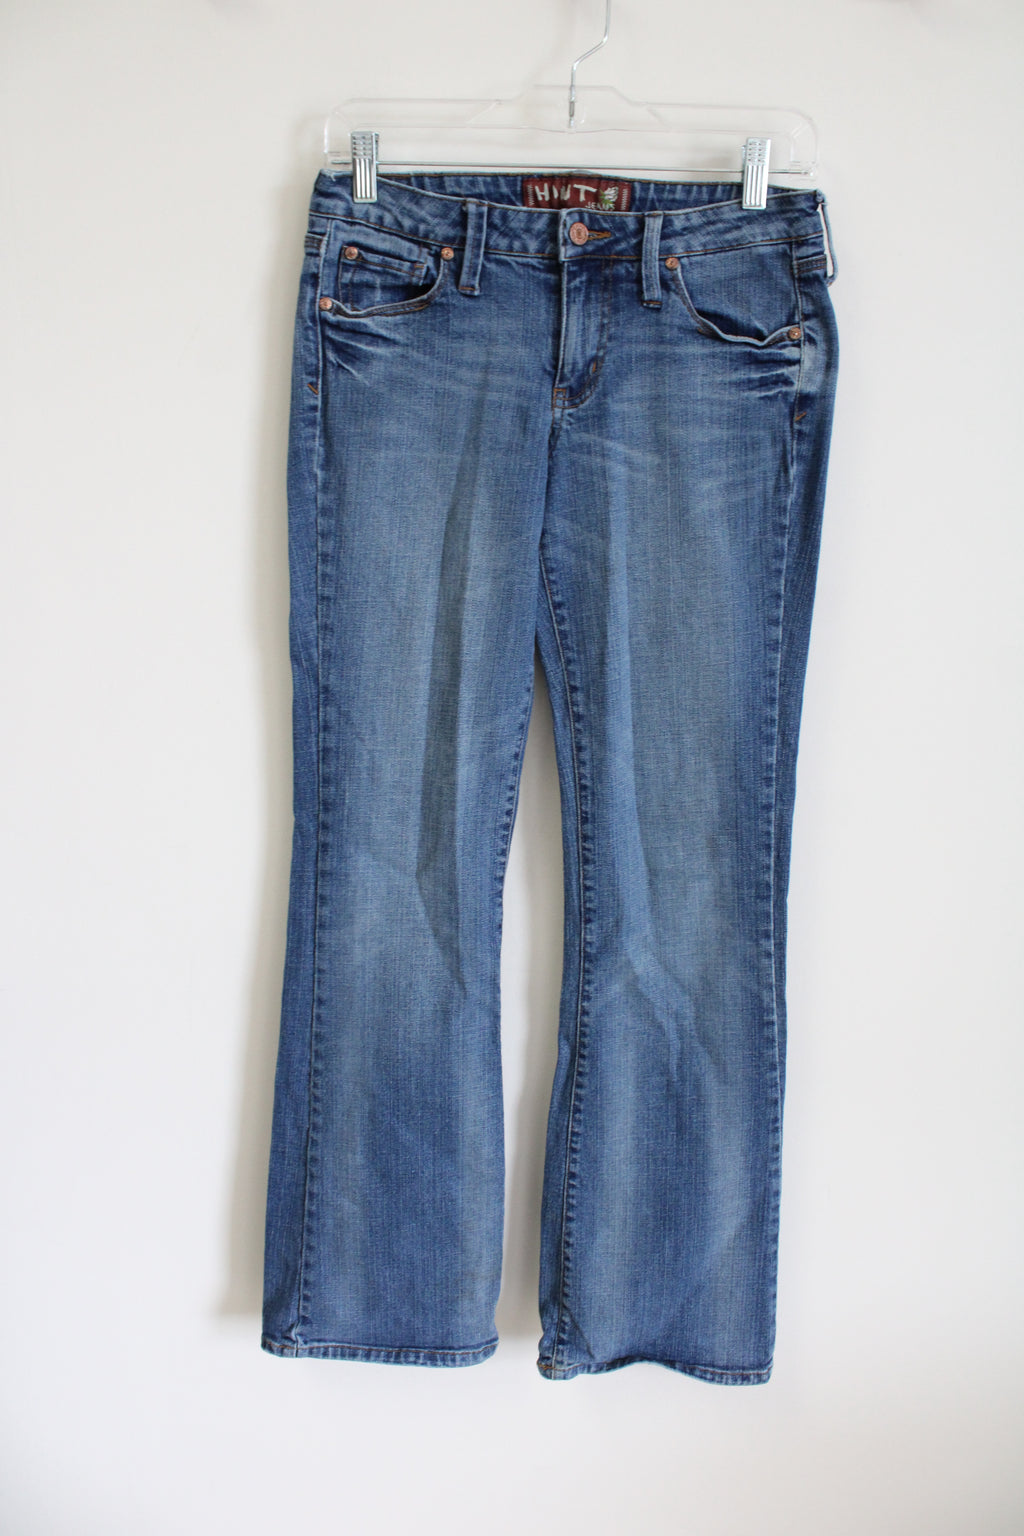 HINT Bootcut Jeans | 7